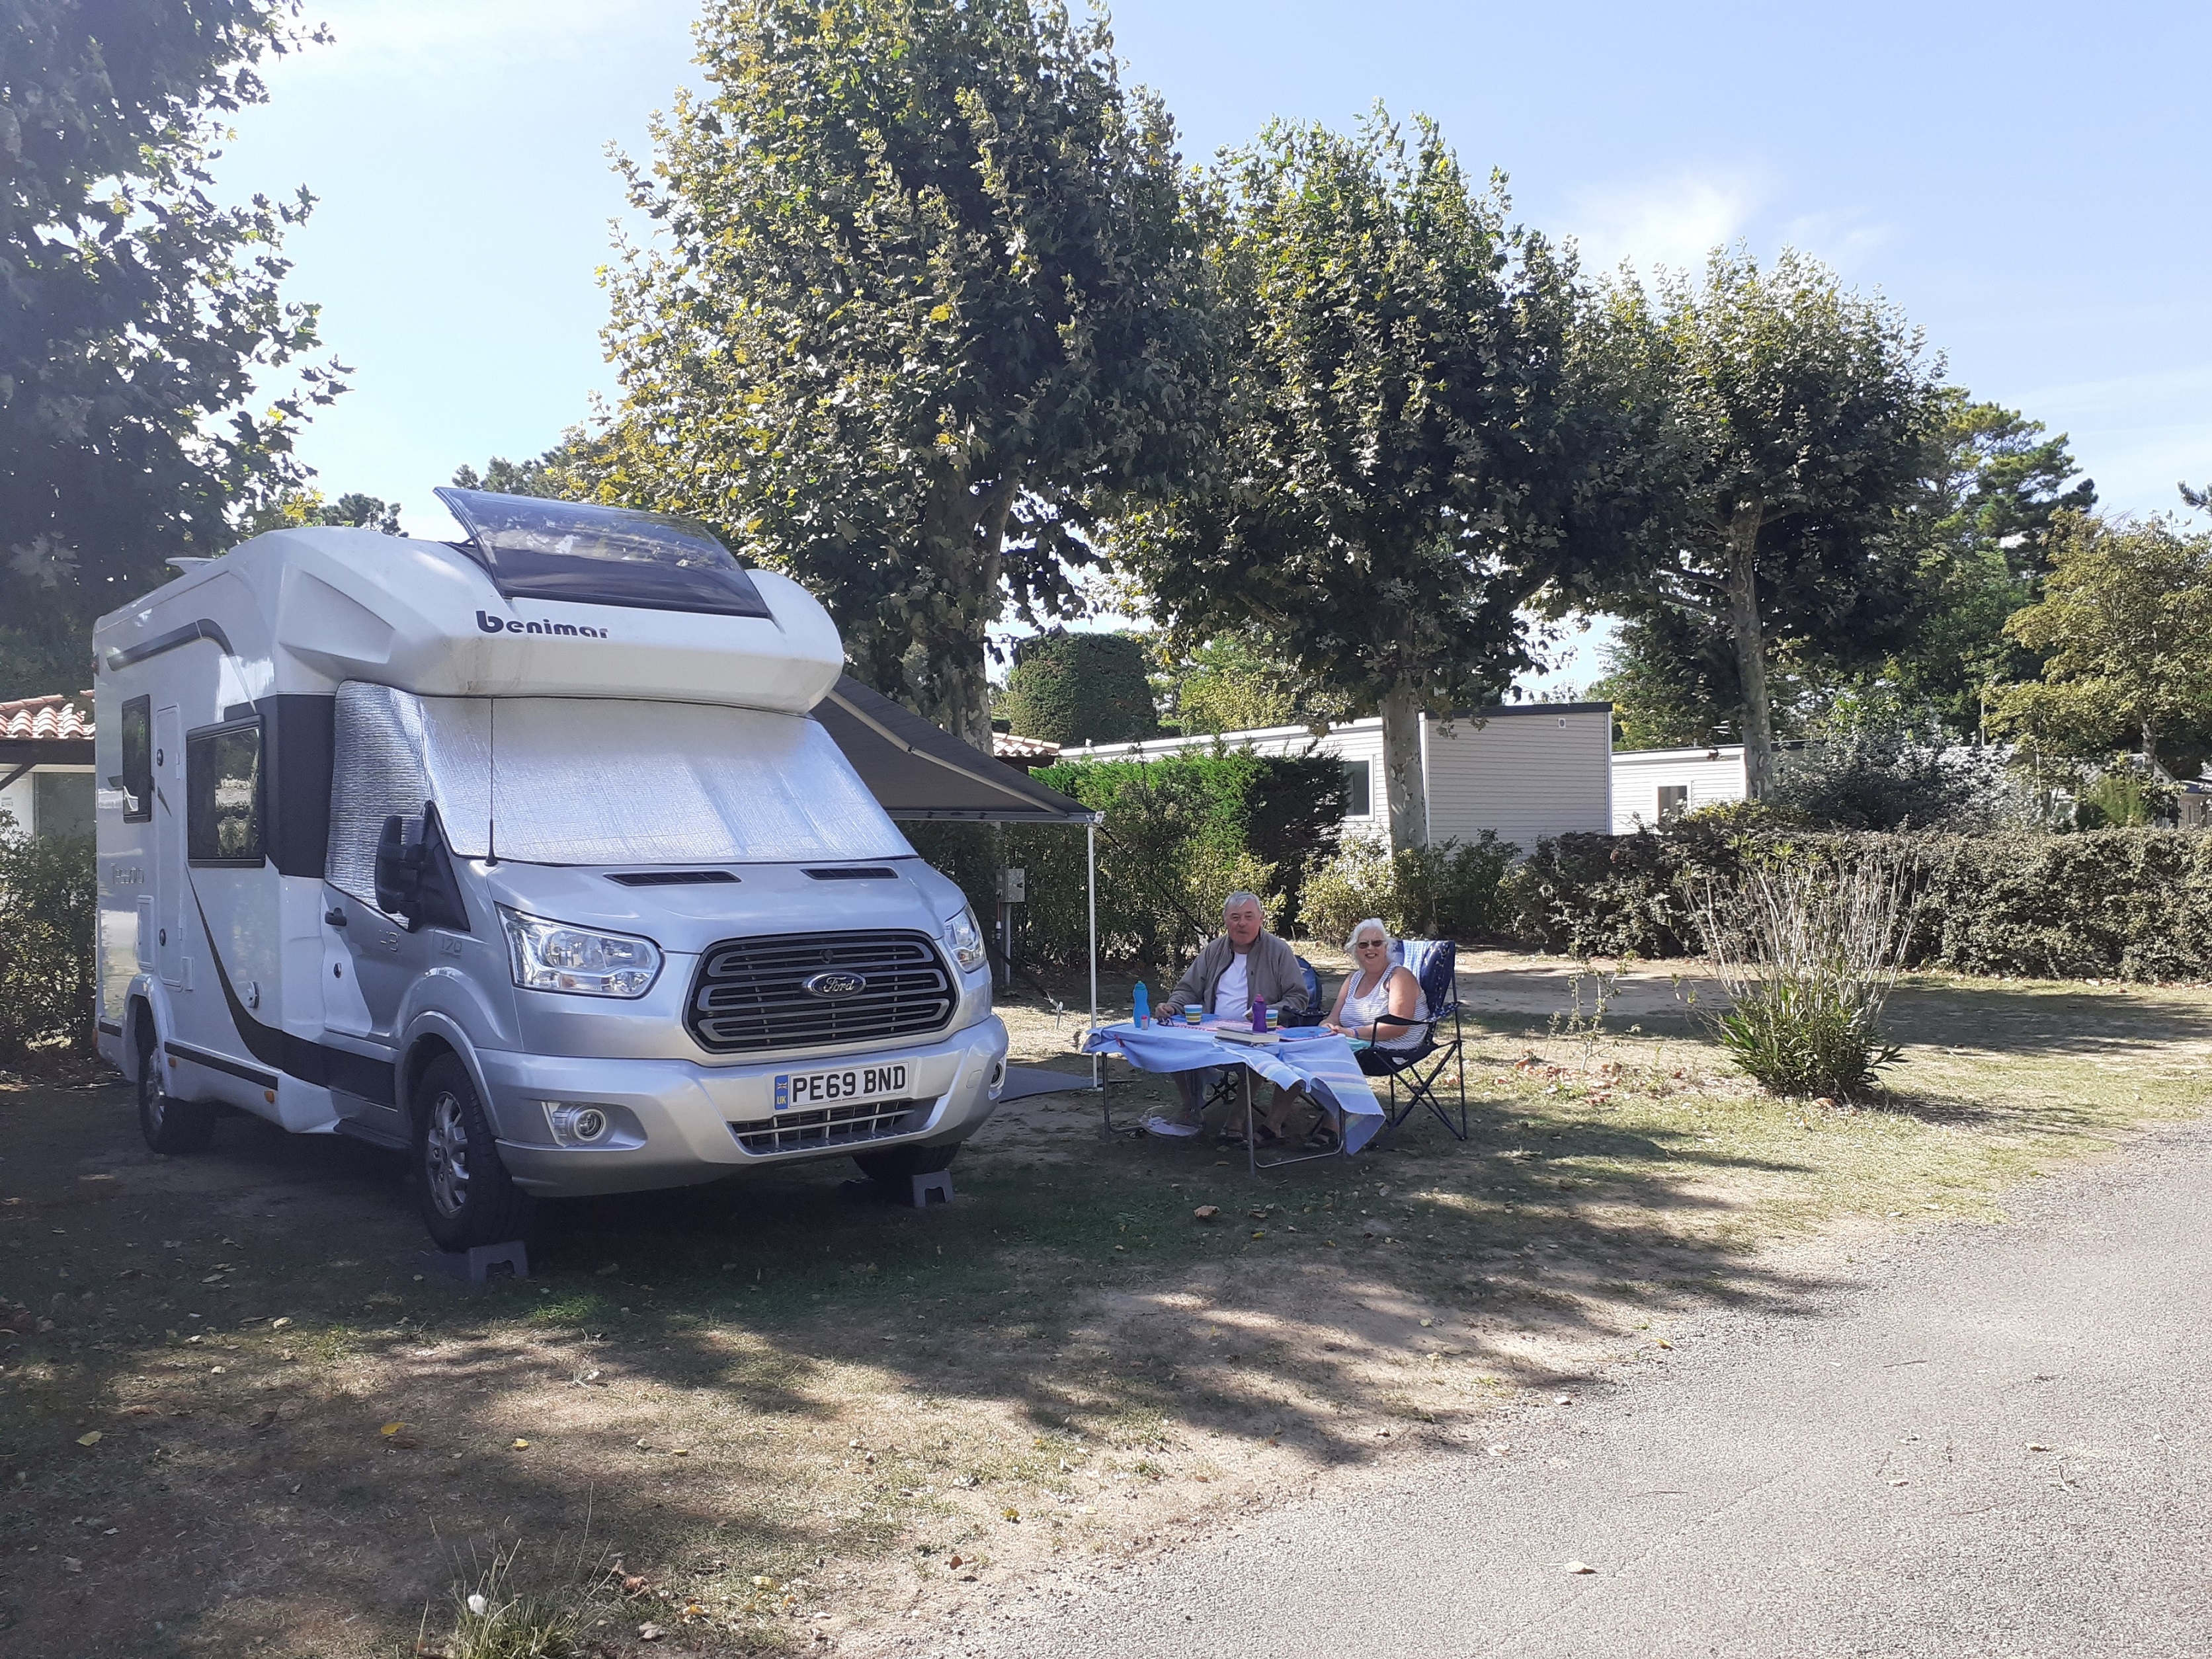 Pitch camper van  – 7.50 m  (water, electricity, drain, 2 people and 1 vehicle) 1/2 Ppl. 1/2 Ppl.